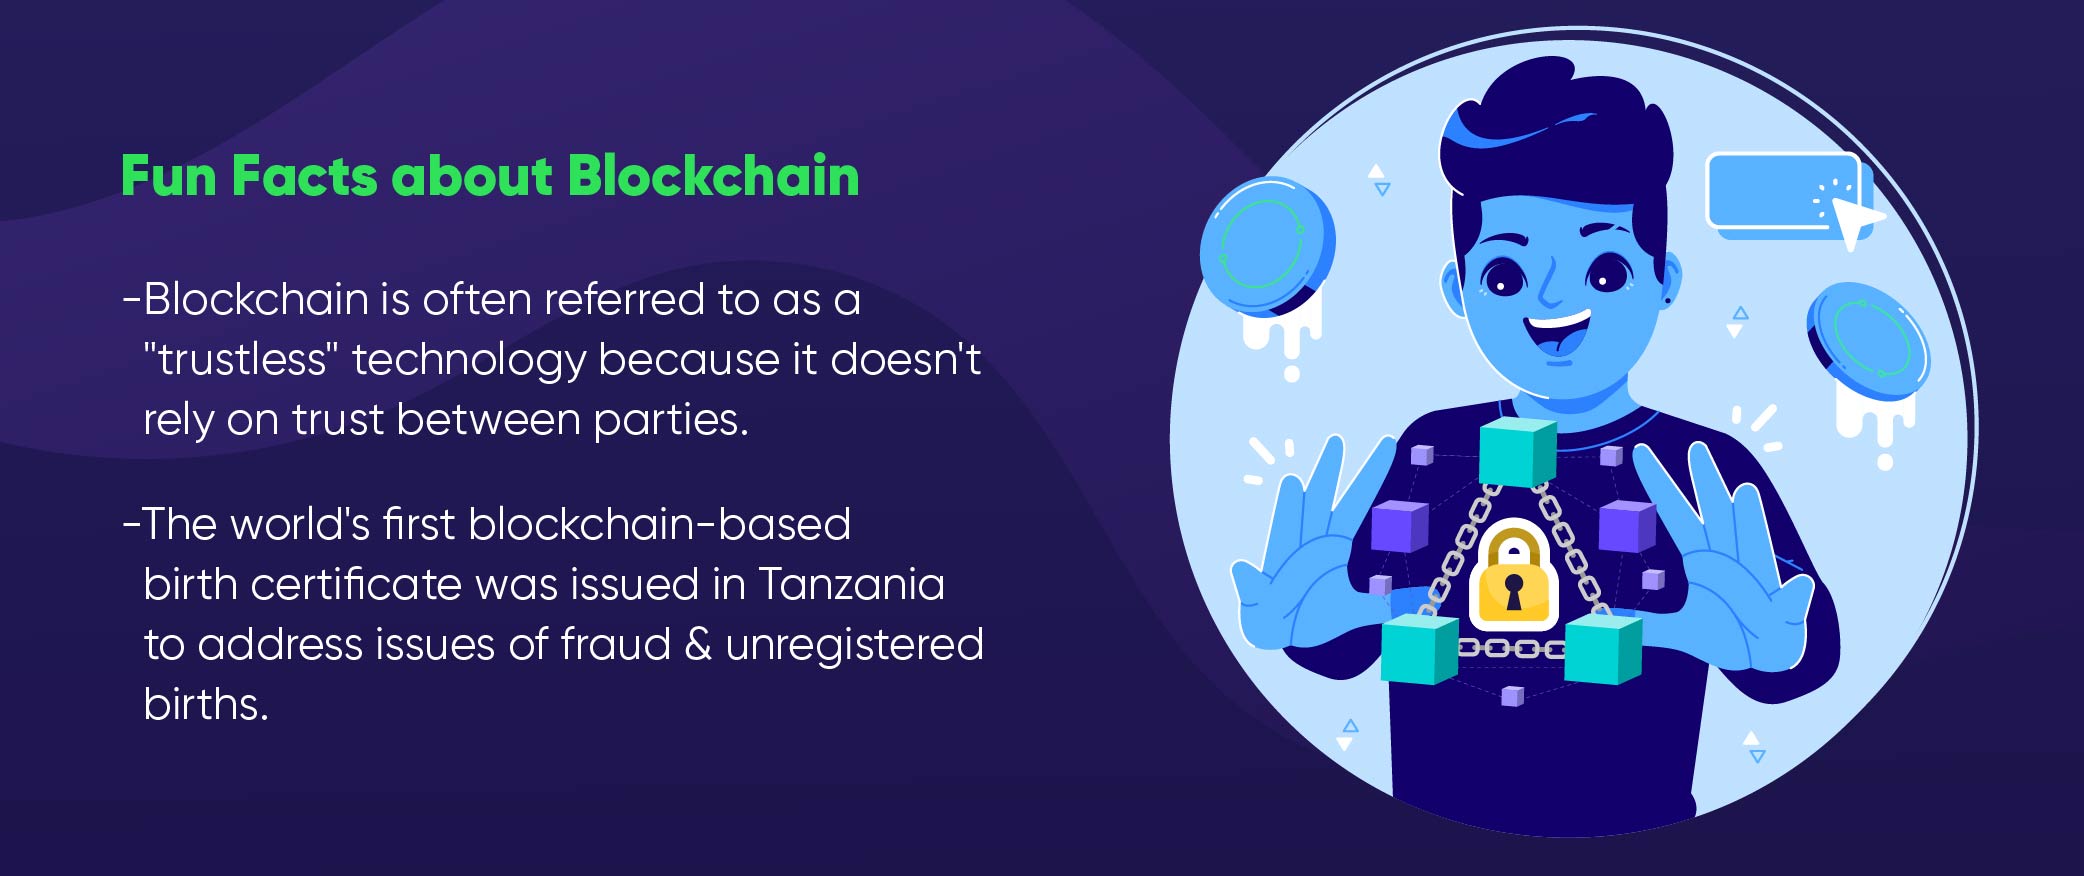 What are the advantages of using blockchain technology? 